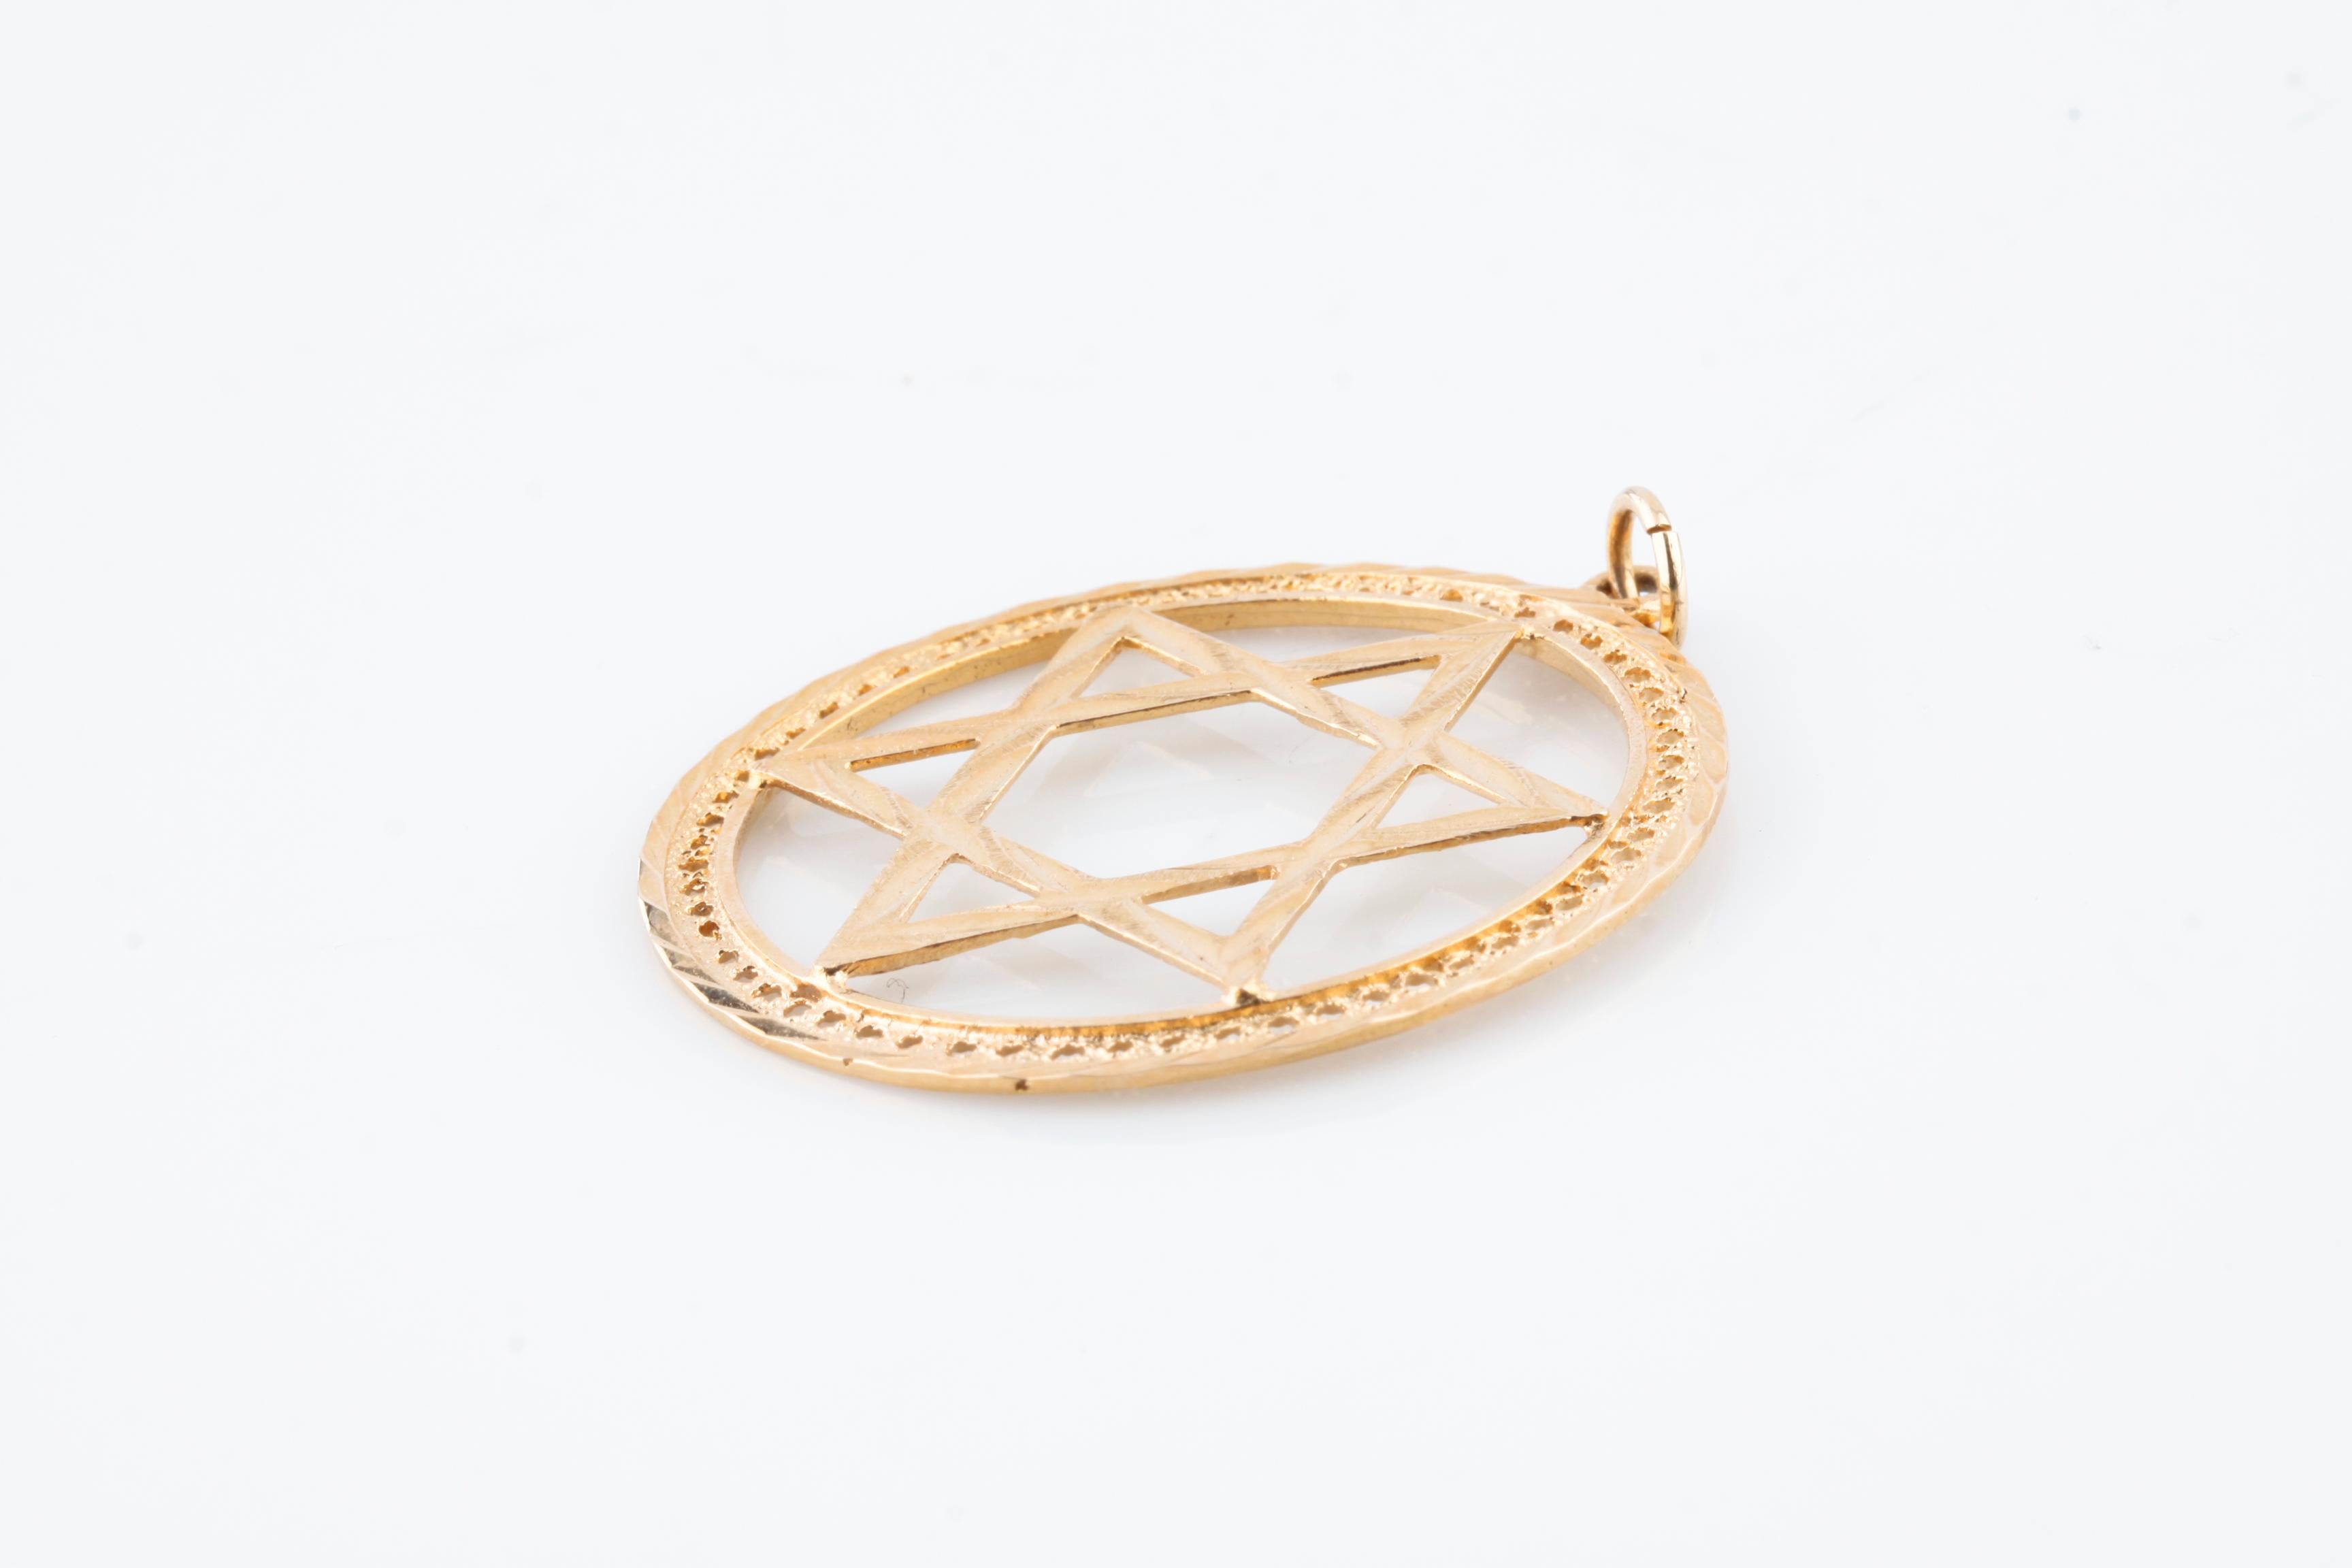 Modern Gorgeous 14k Rose Gold Star of David Pendant Charm Great Gift! For Sale